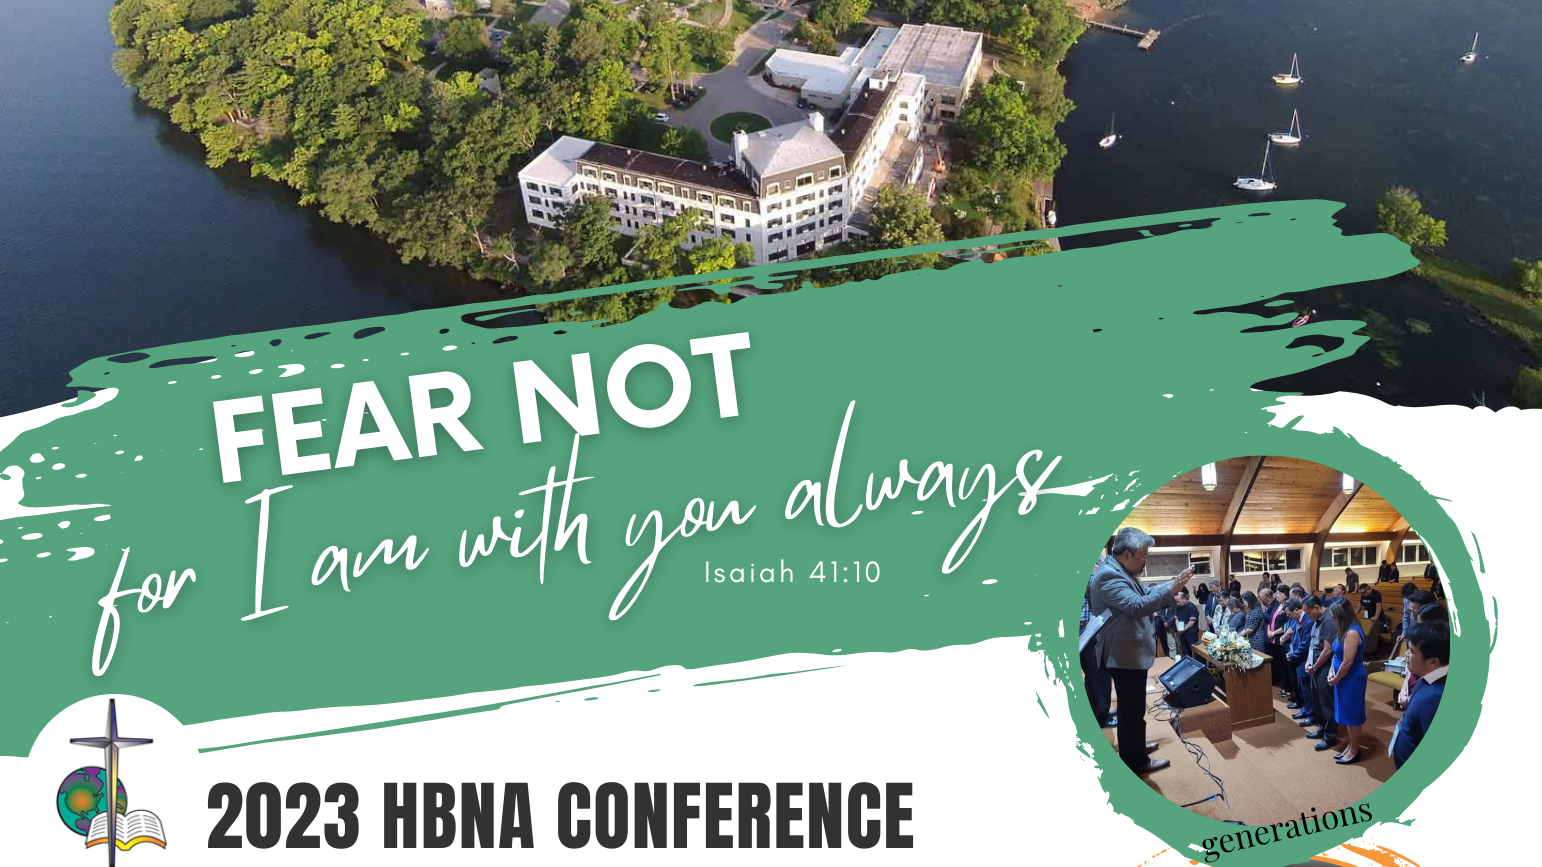 HBNA National Annual Meeting Conference